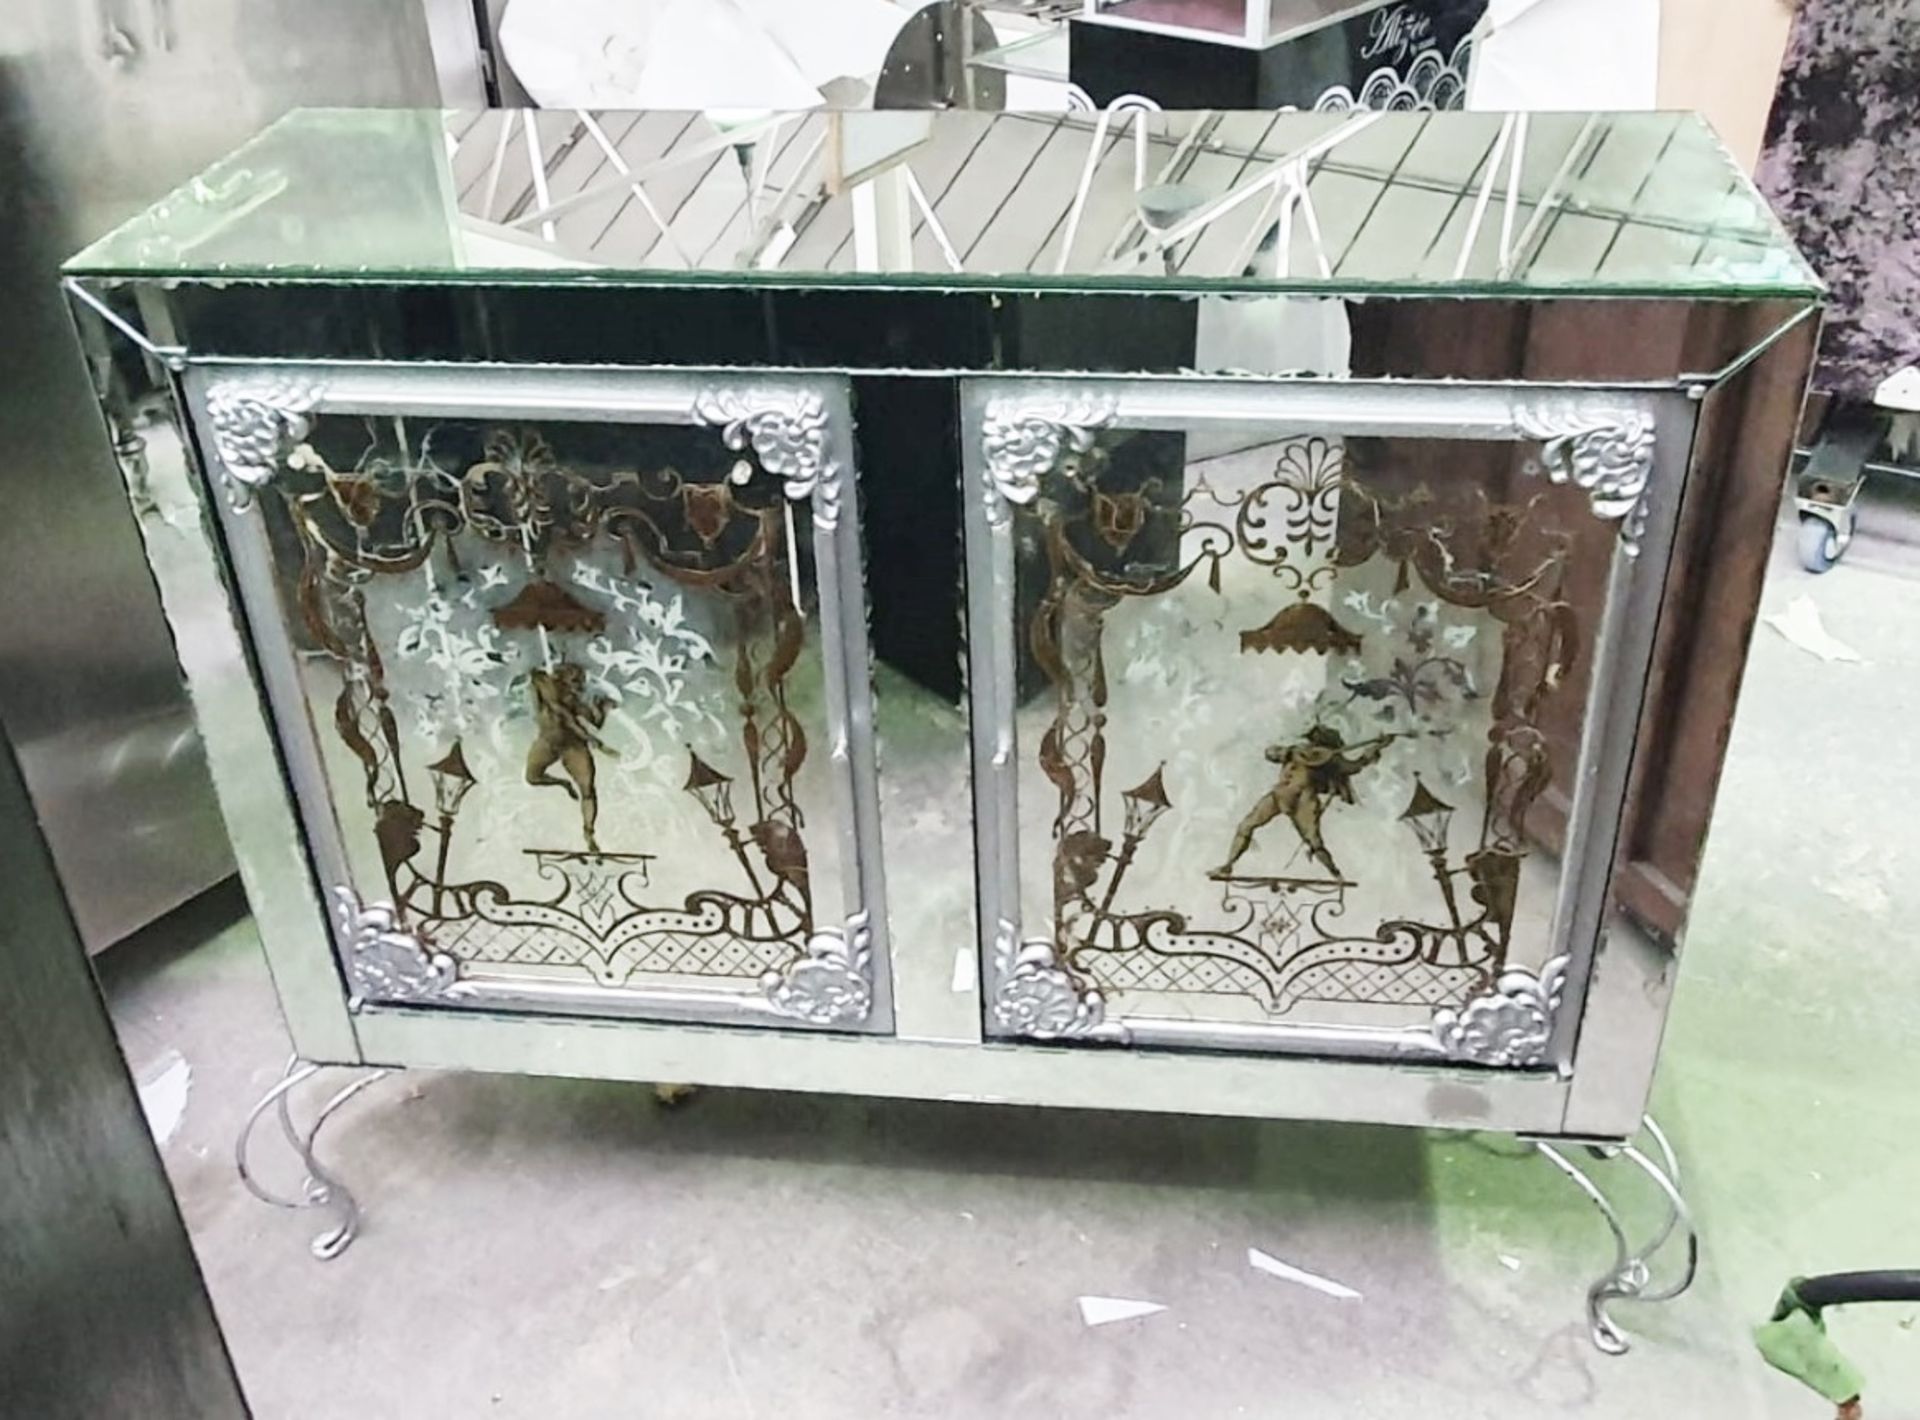 1 x Boutique Large Mirrored Sideboard With Steel Legs And Embellishments - Image 15 of 18